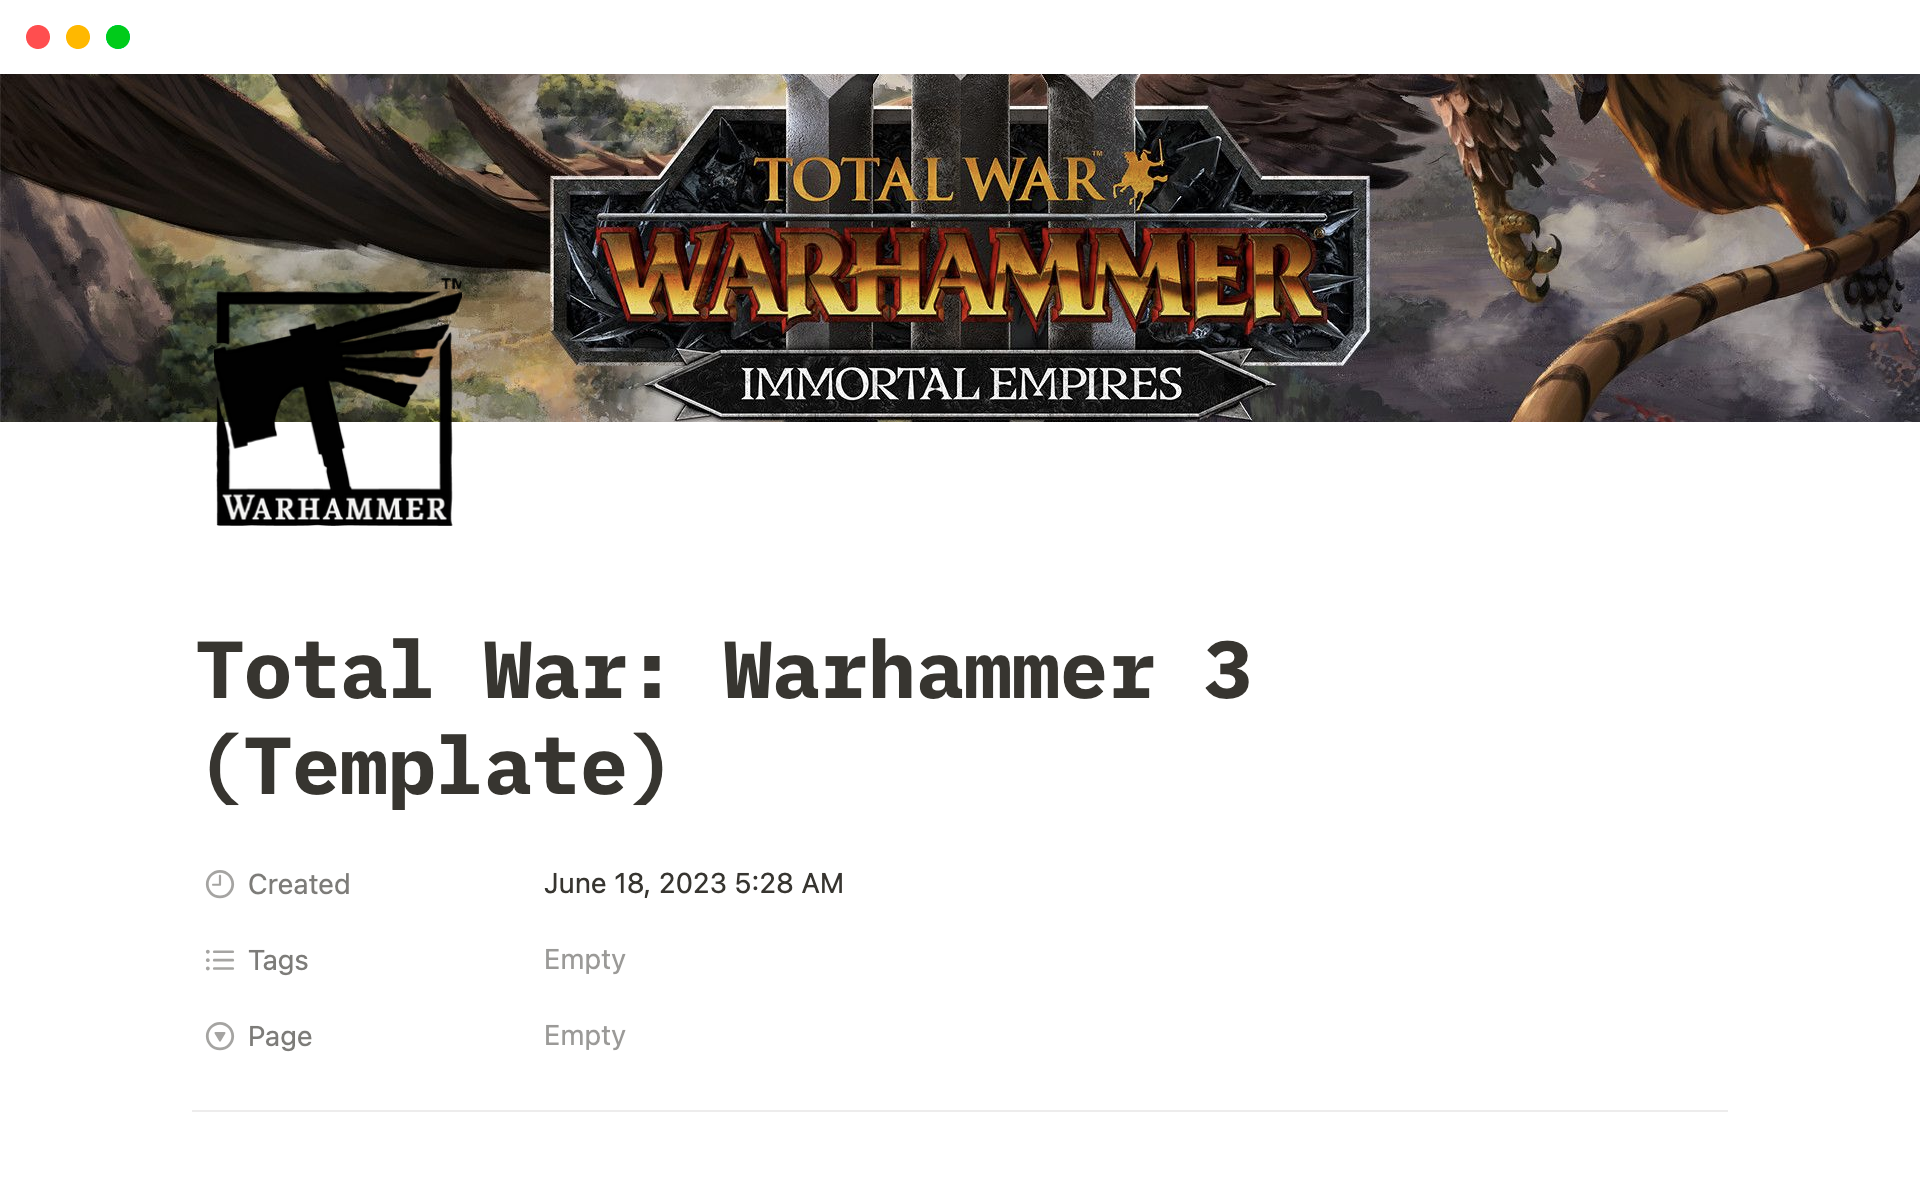 Allows you to track your Warhammer 3 Campaigns